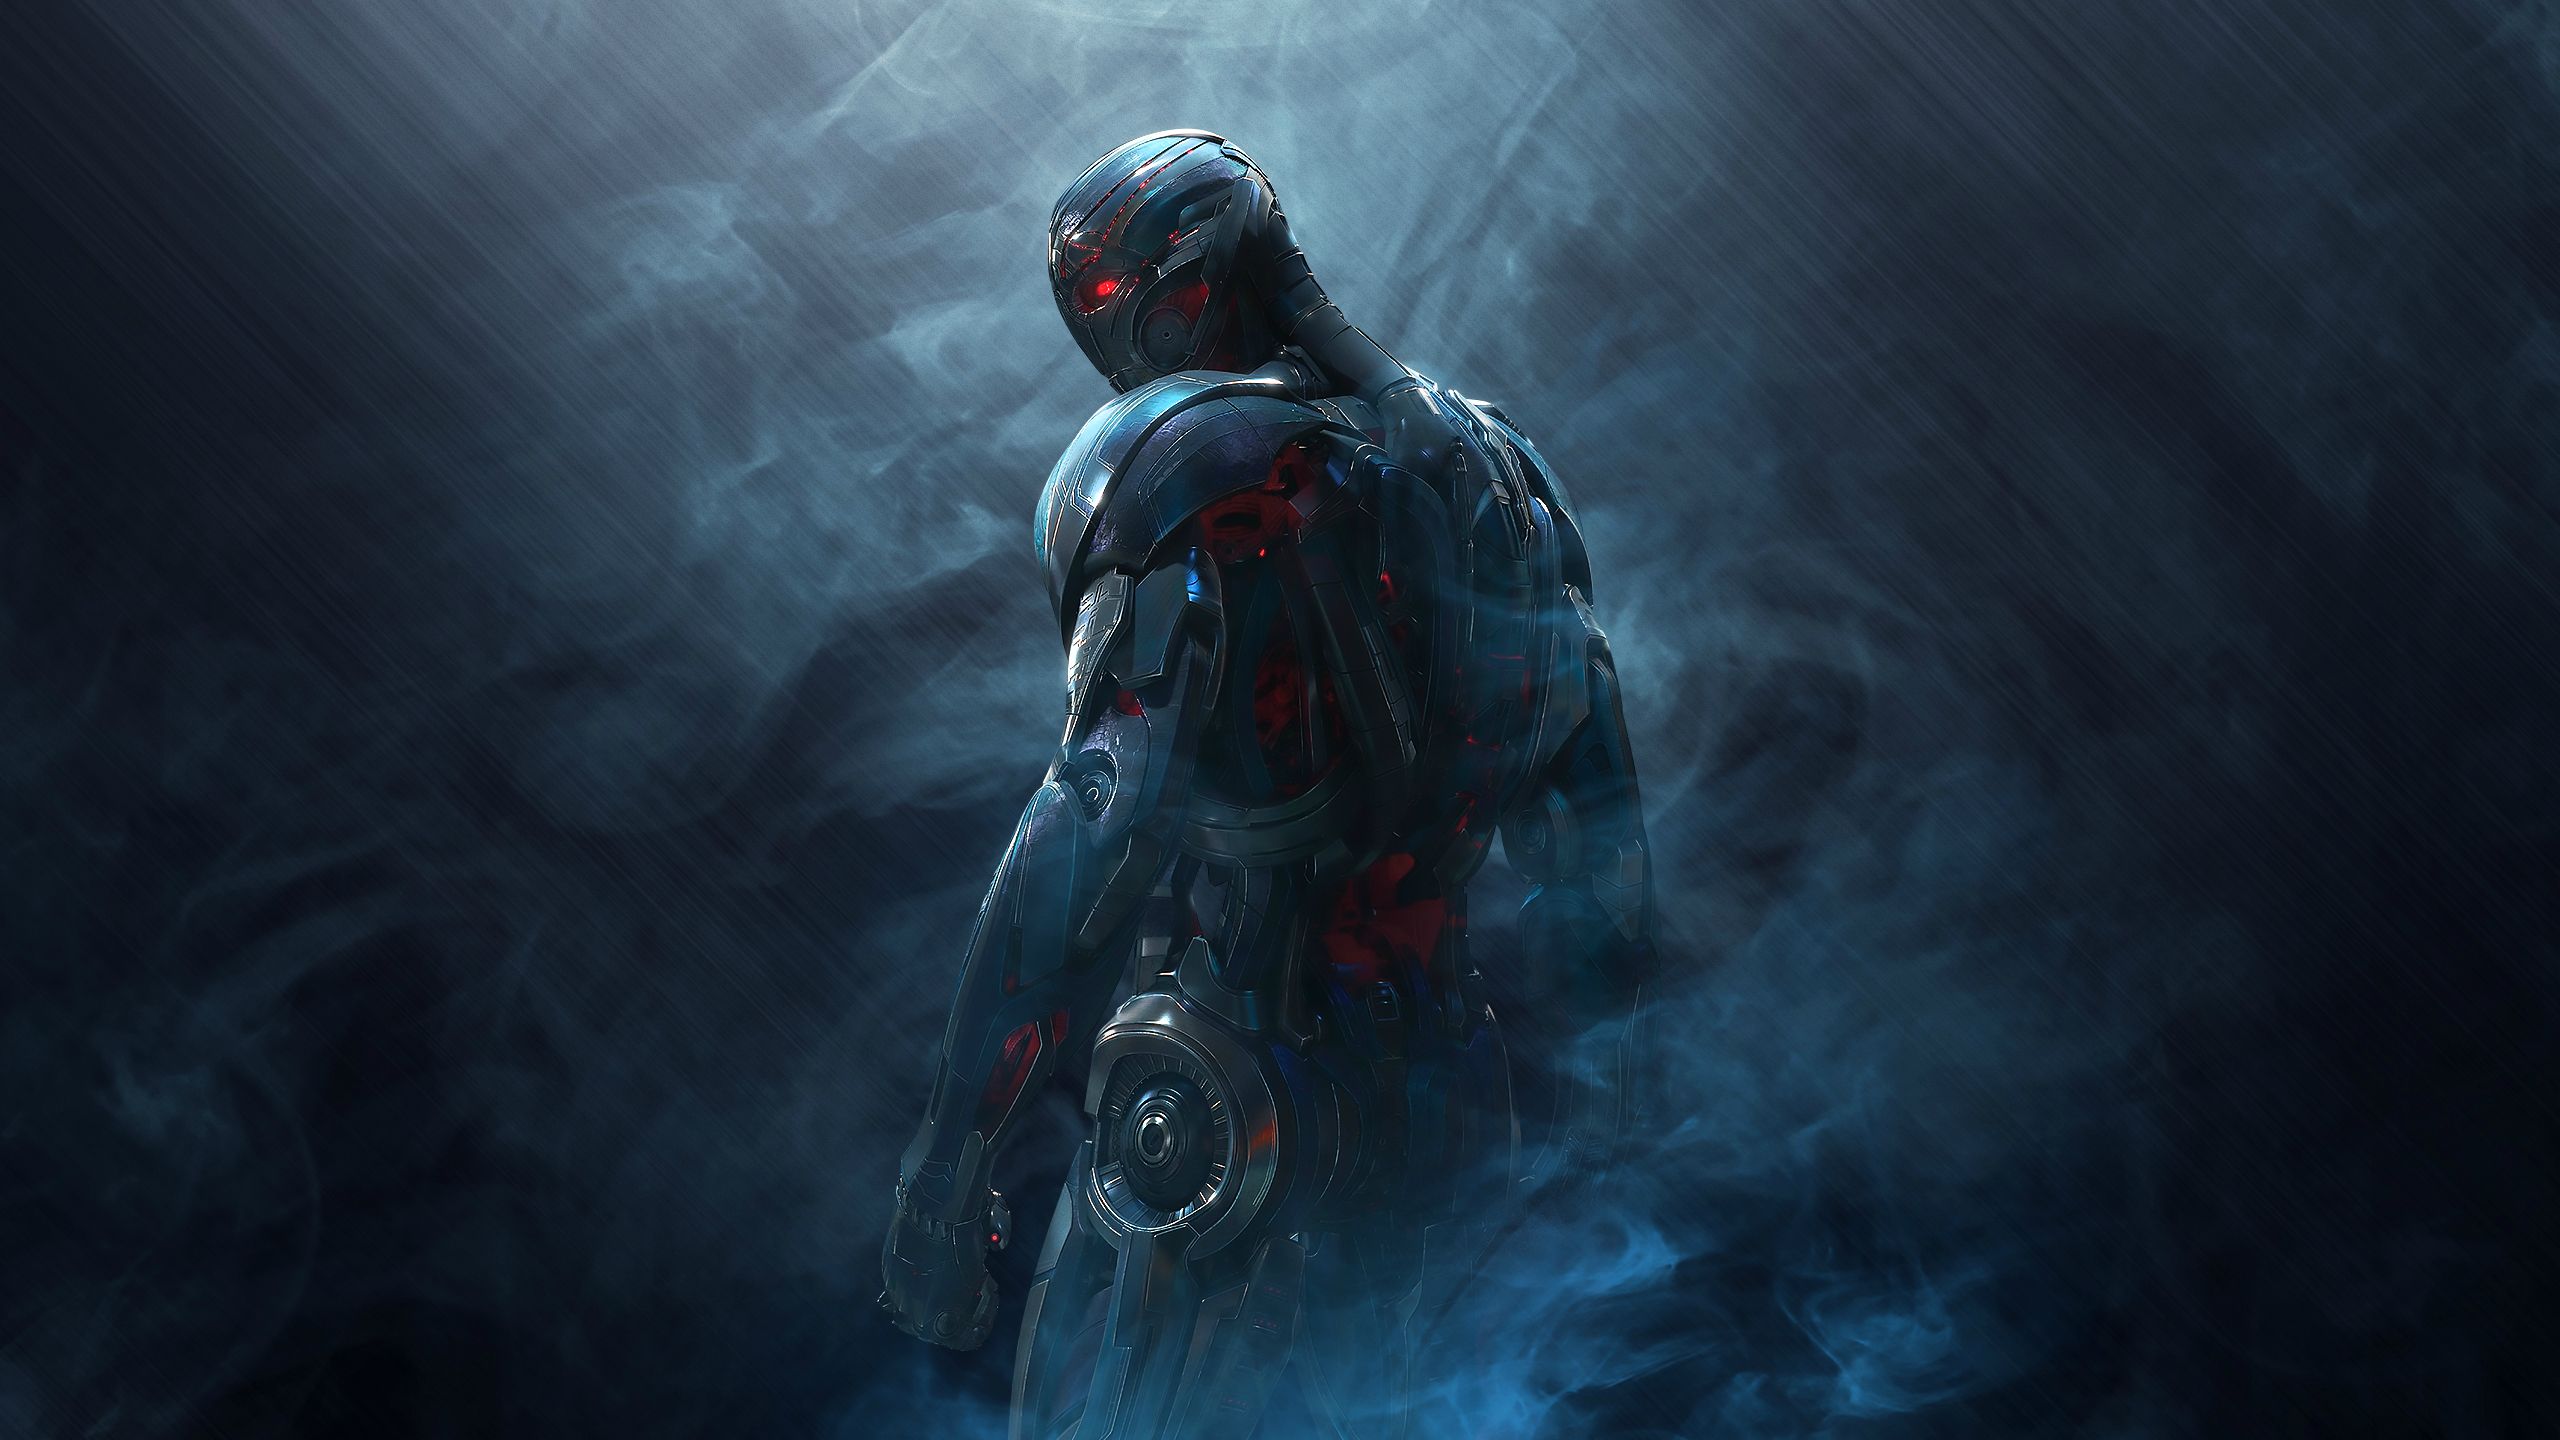 High Definition wallpaper ultron, movie, avengers: age of ultron, the avengers